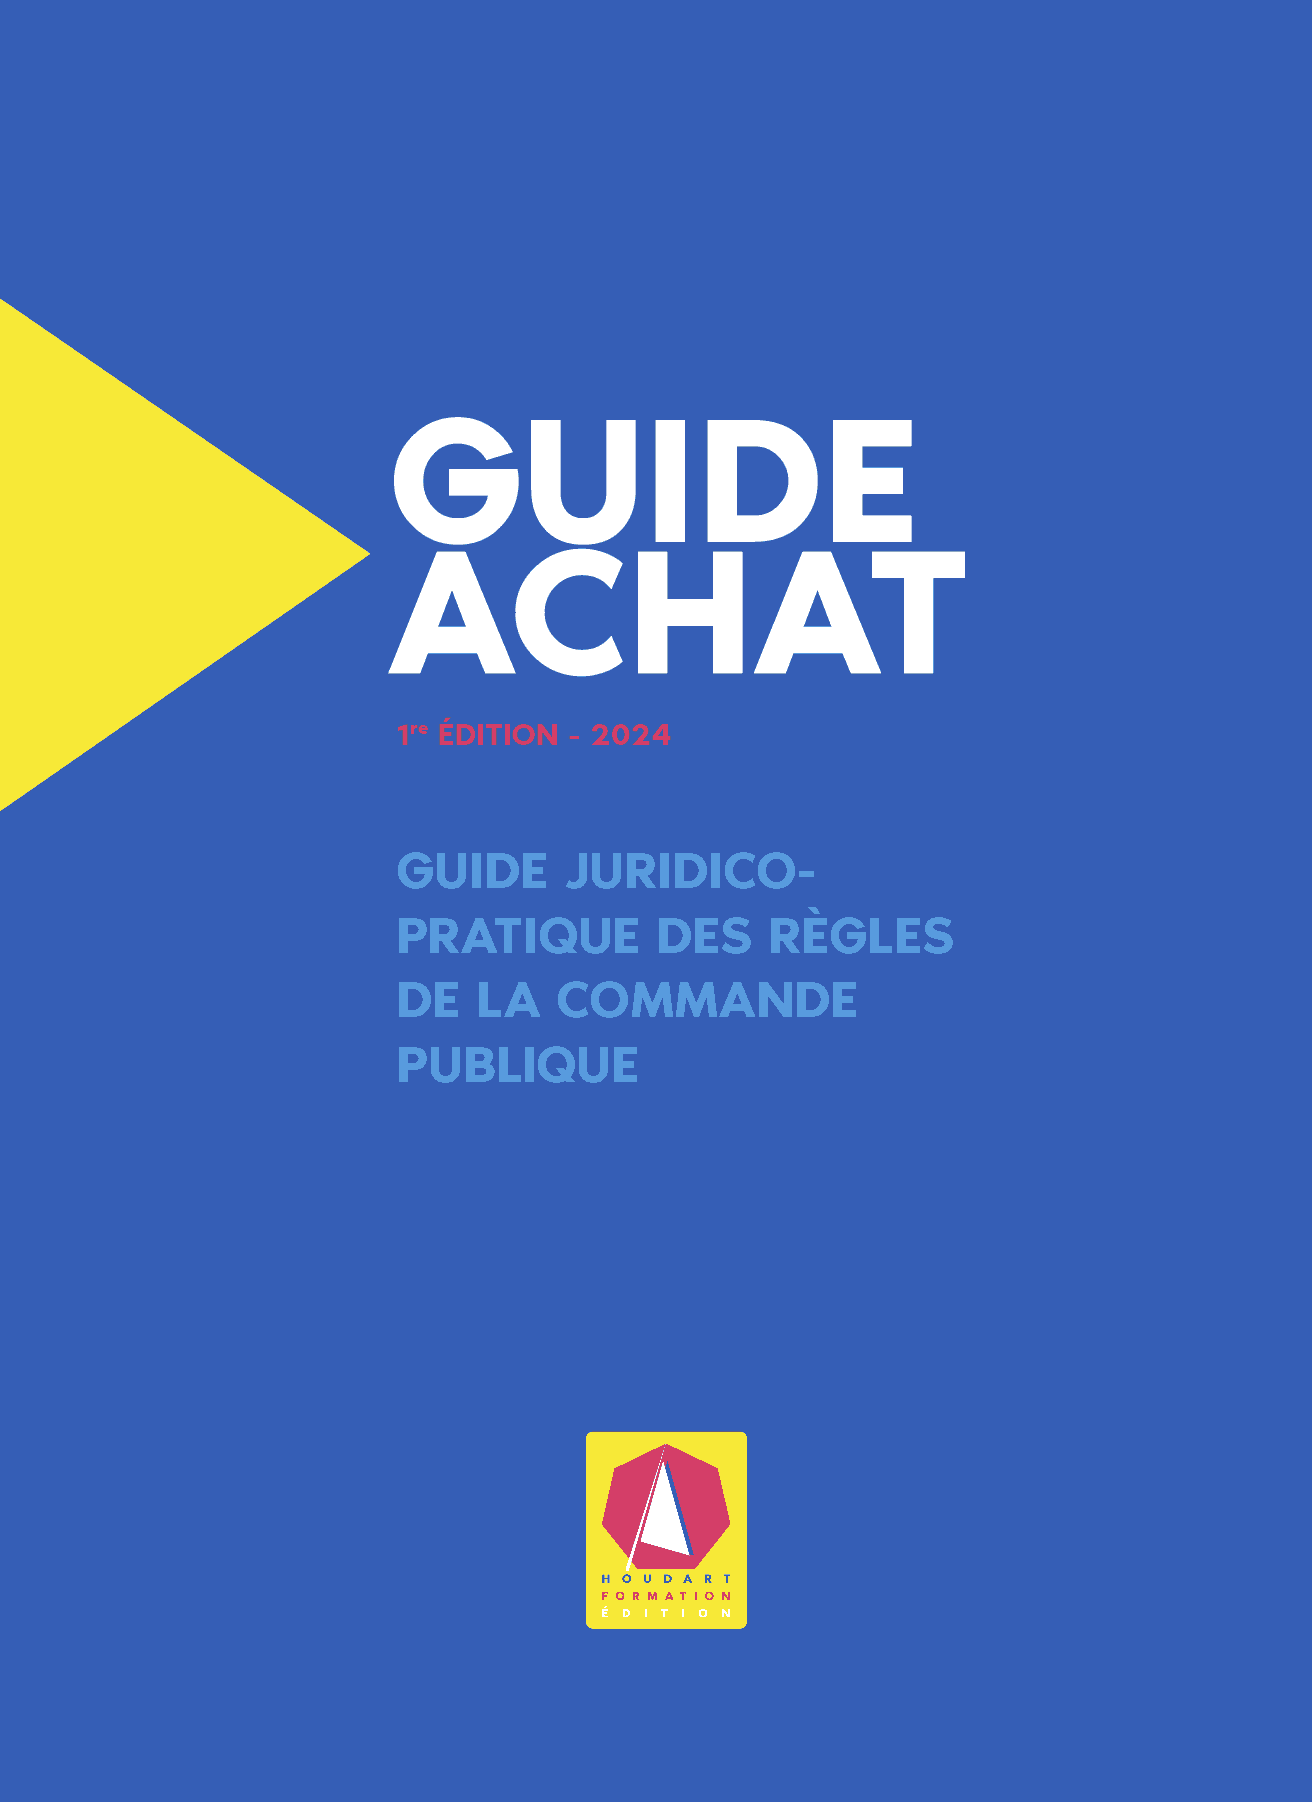 Guide-achat-cover-2024